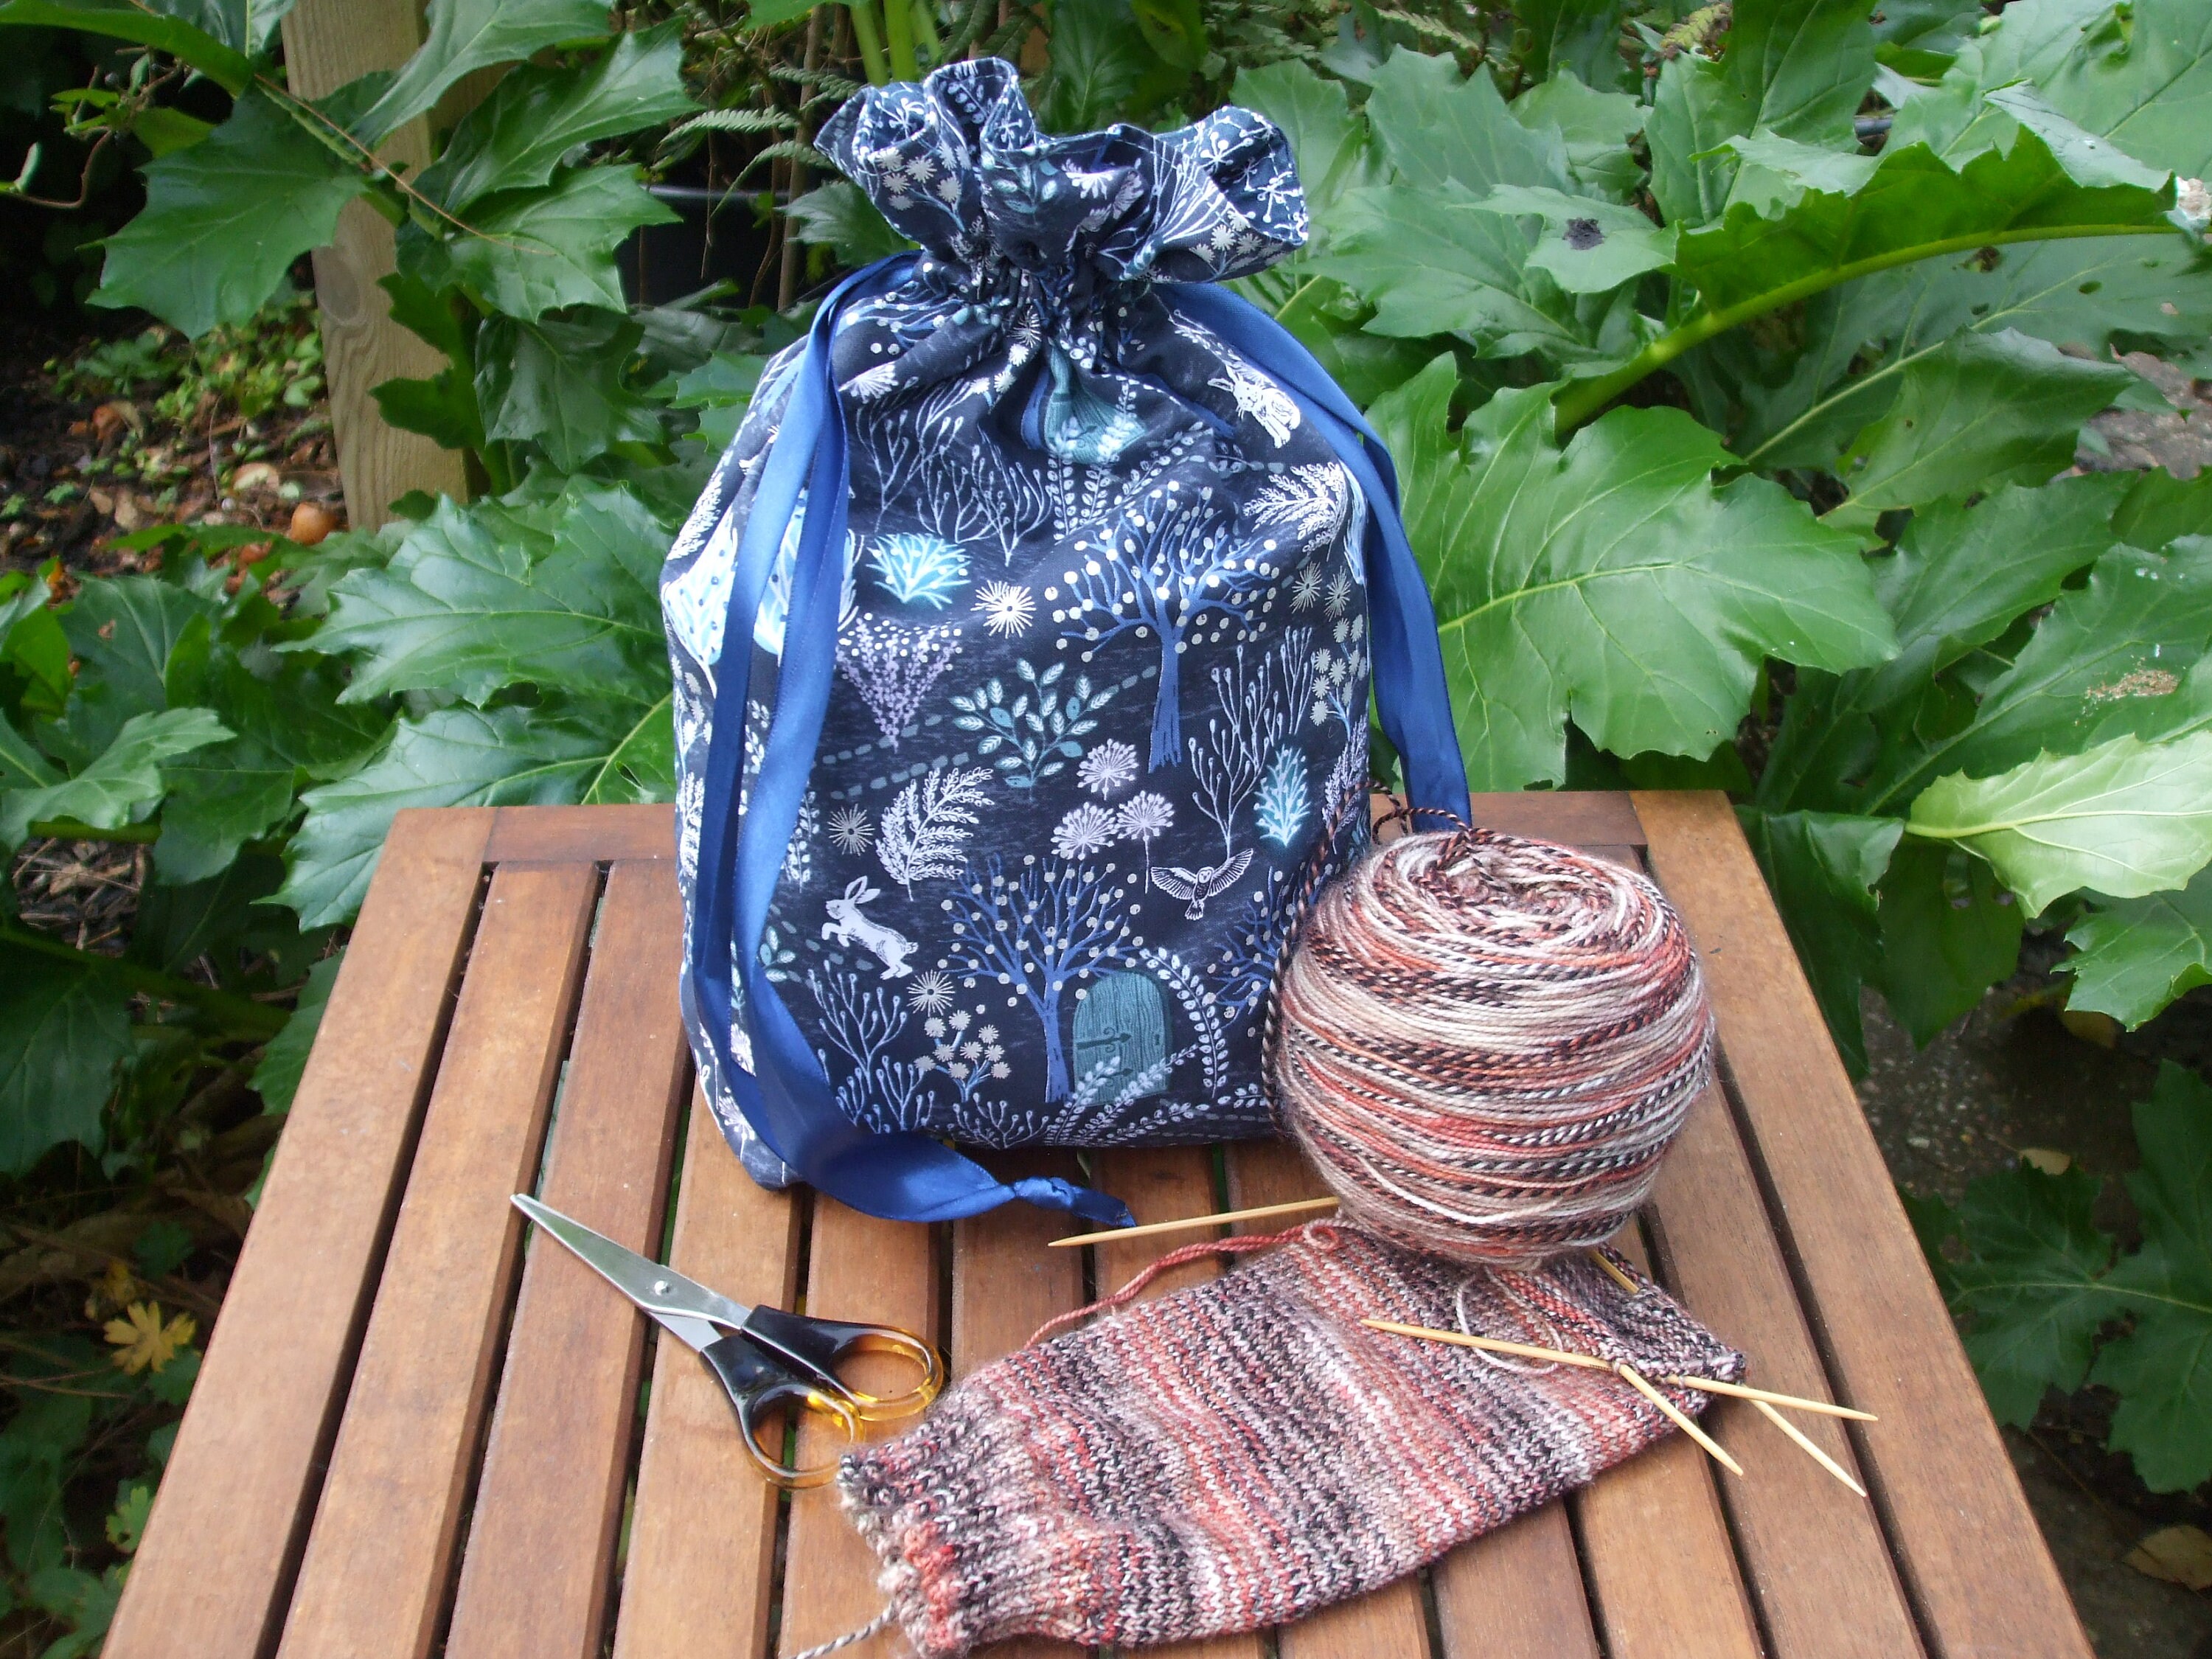 “Yarn Bowl” Project Bags